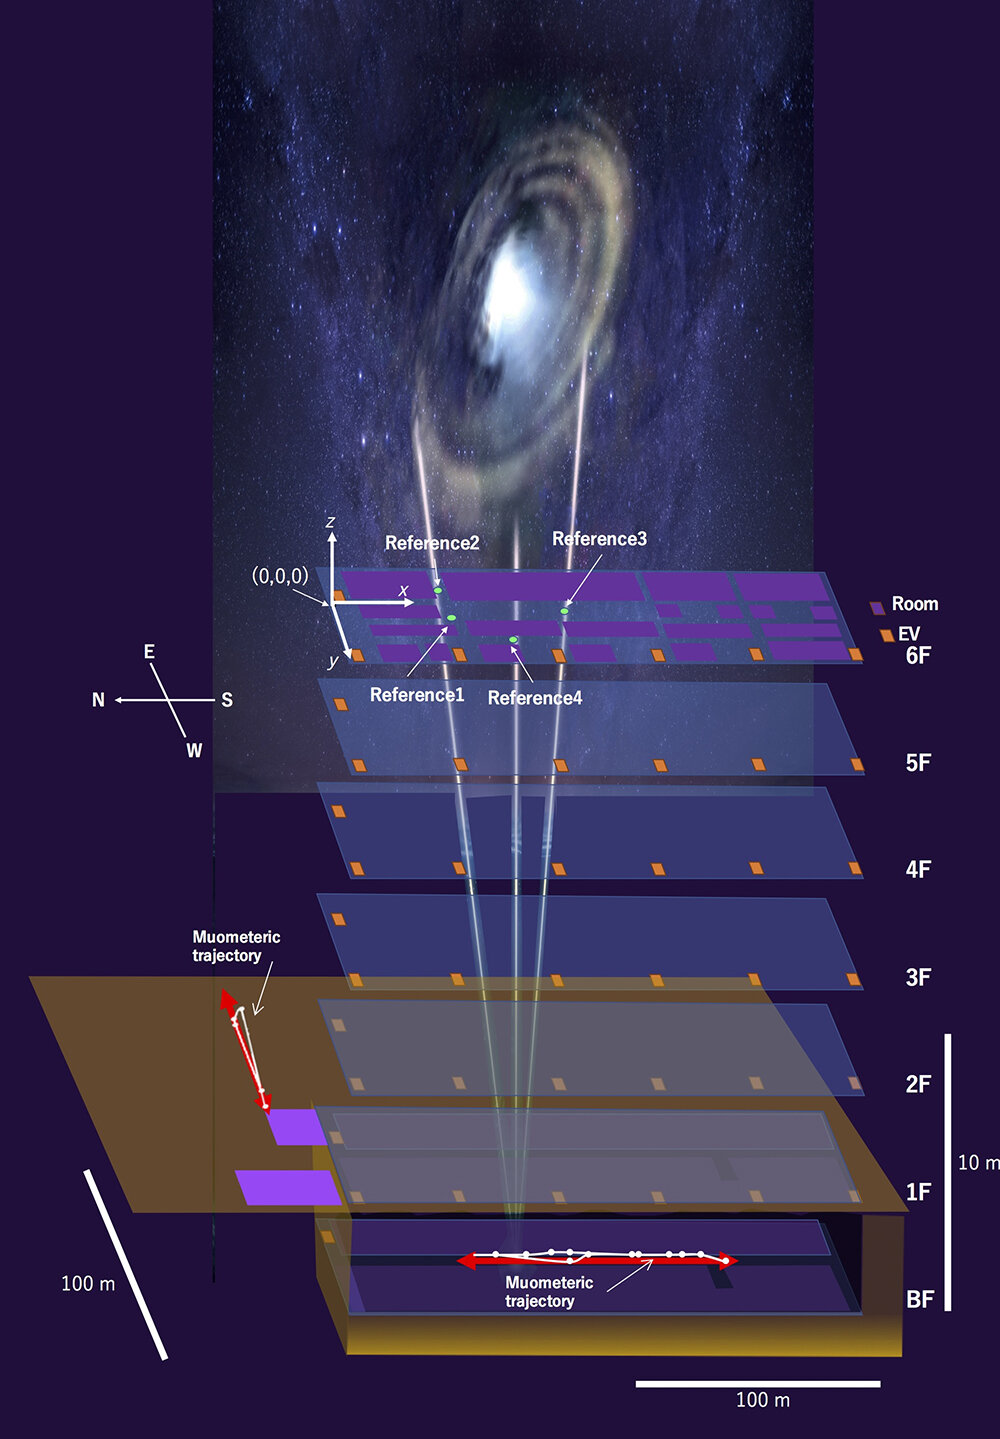 #Underground navigation maybe possible with cosmic-ray muons, research shows